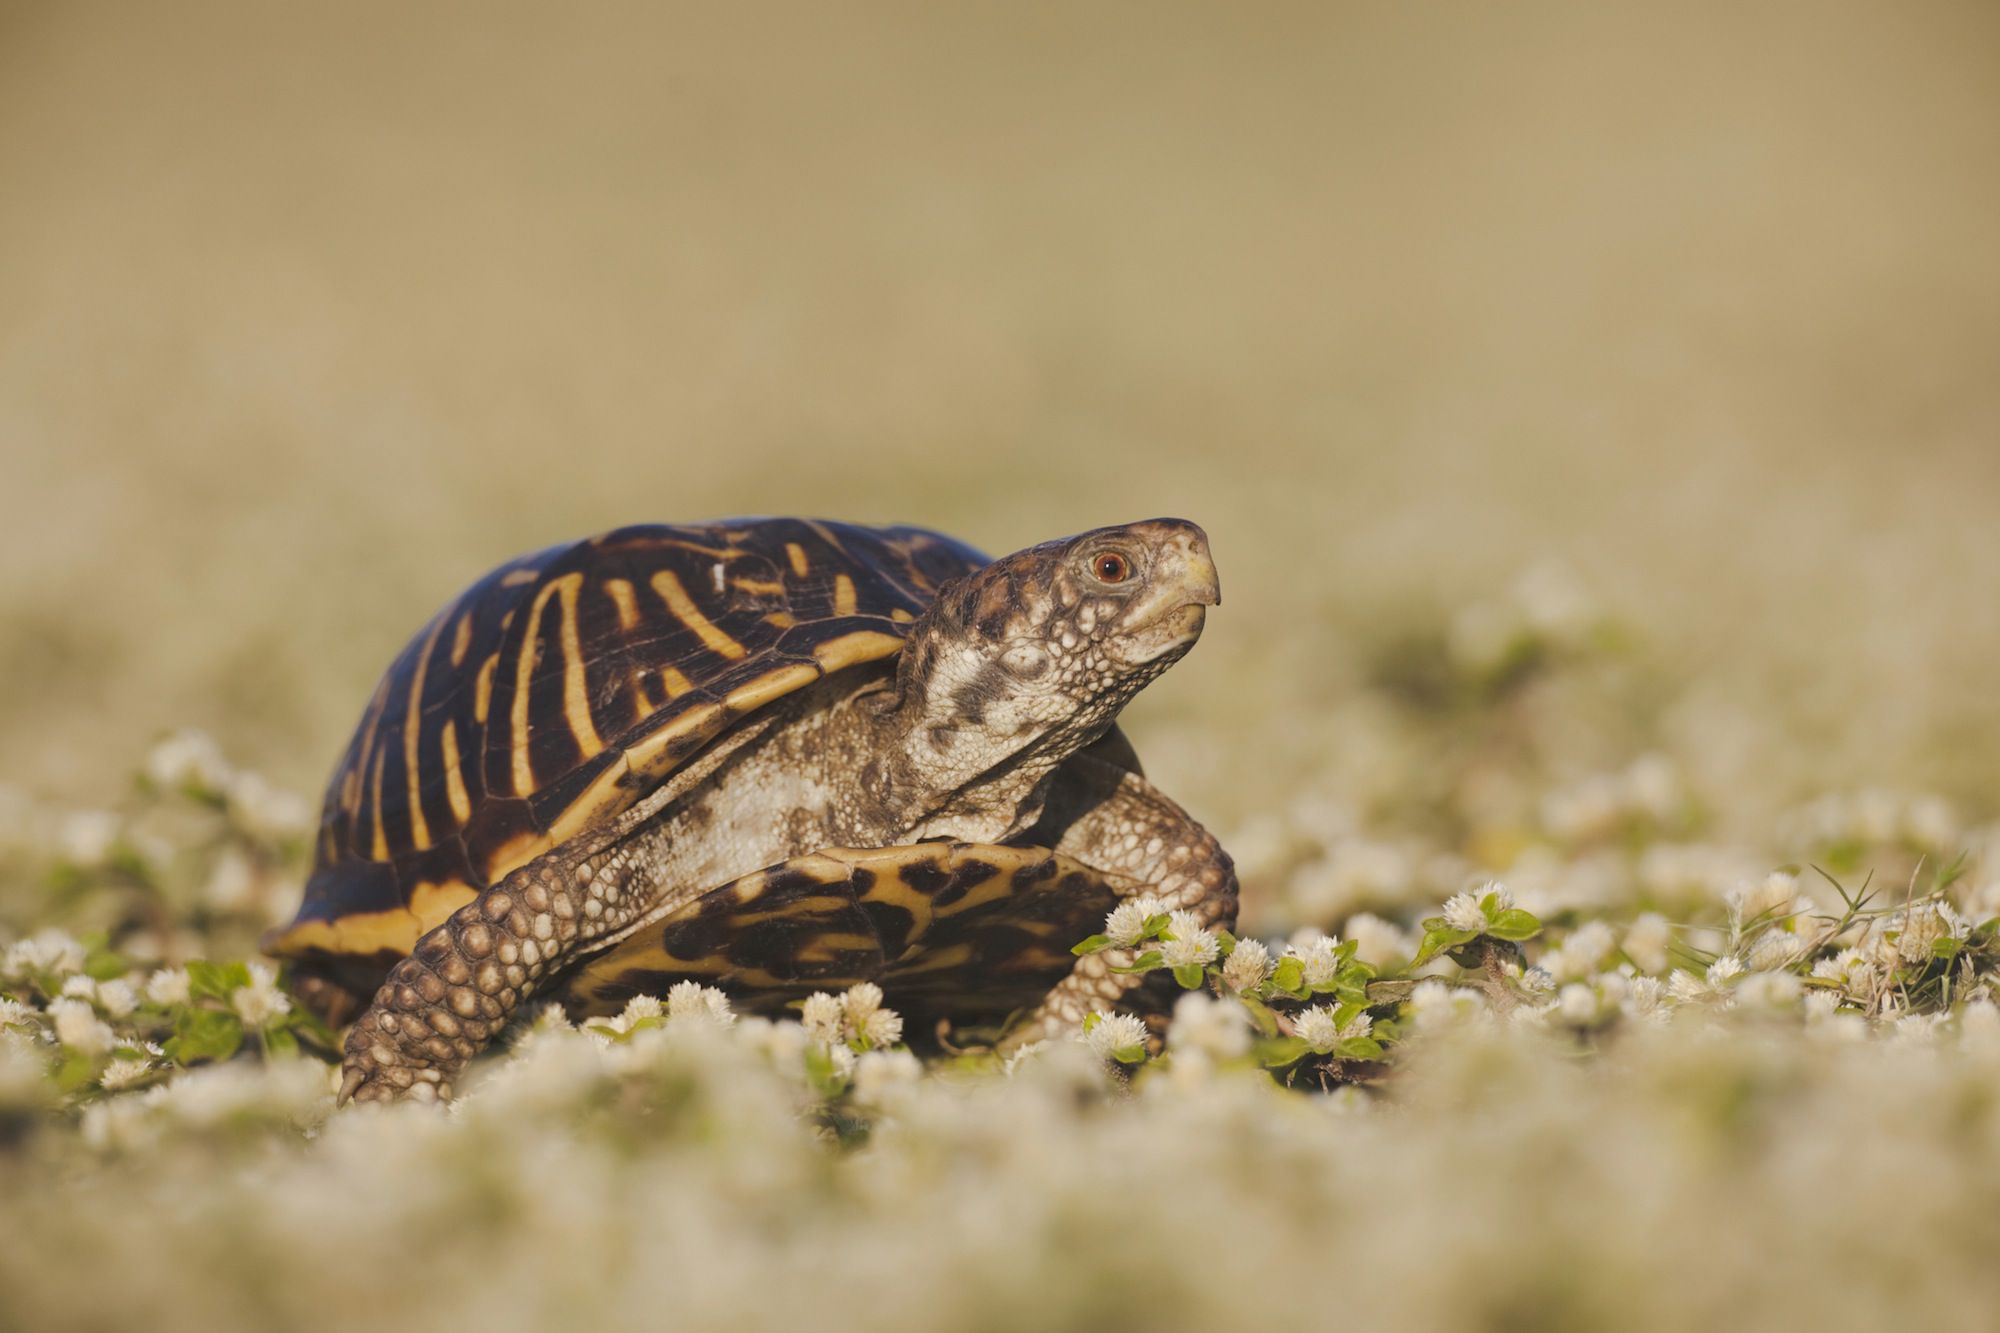 A Guide to Caring for Ornate Box Turtles